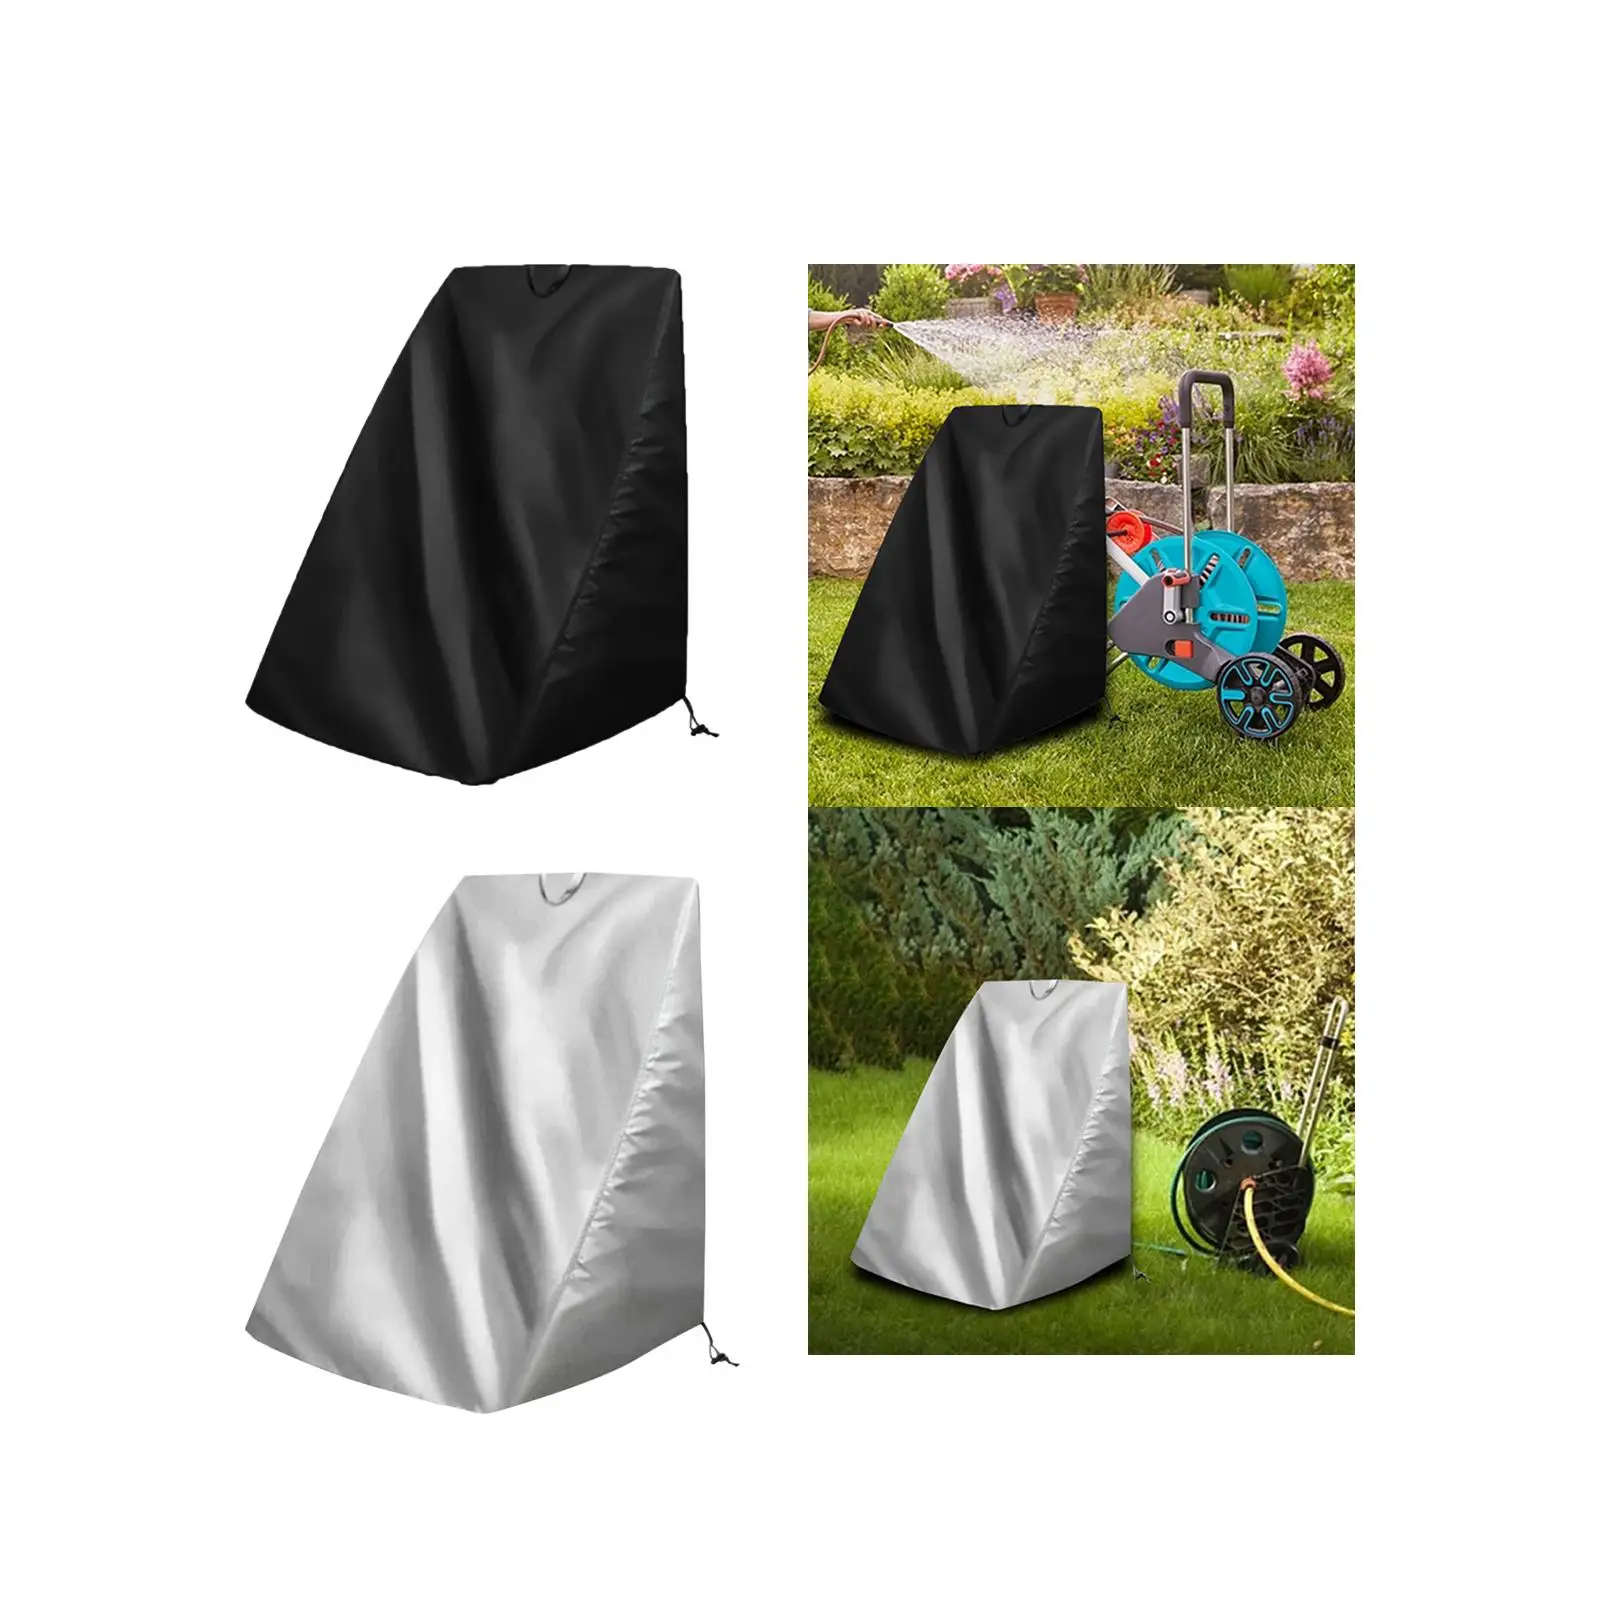 Hose Reel Cover Household All Season Hose Cart Covers for Rewind Hose Storage Rack Water Pipe Holder Stand Hose Reel Holder Home